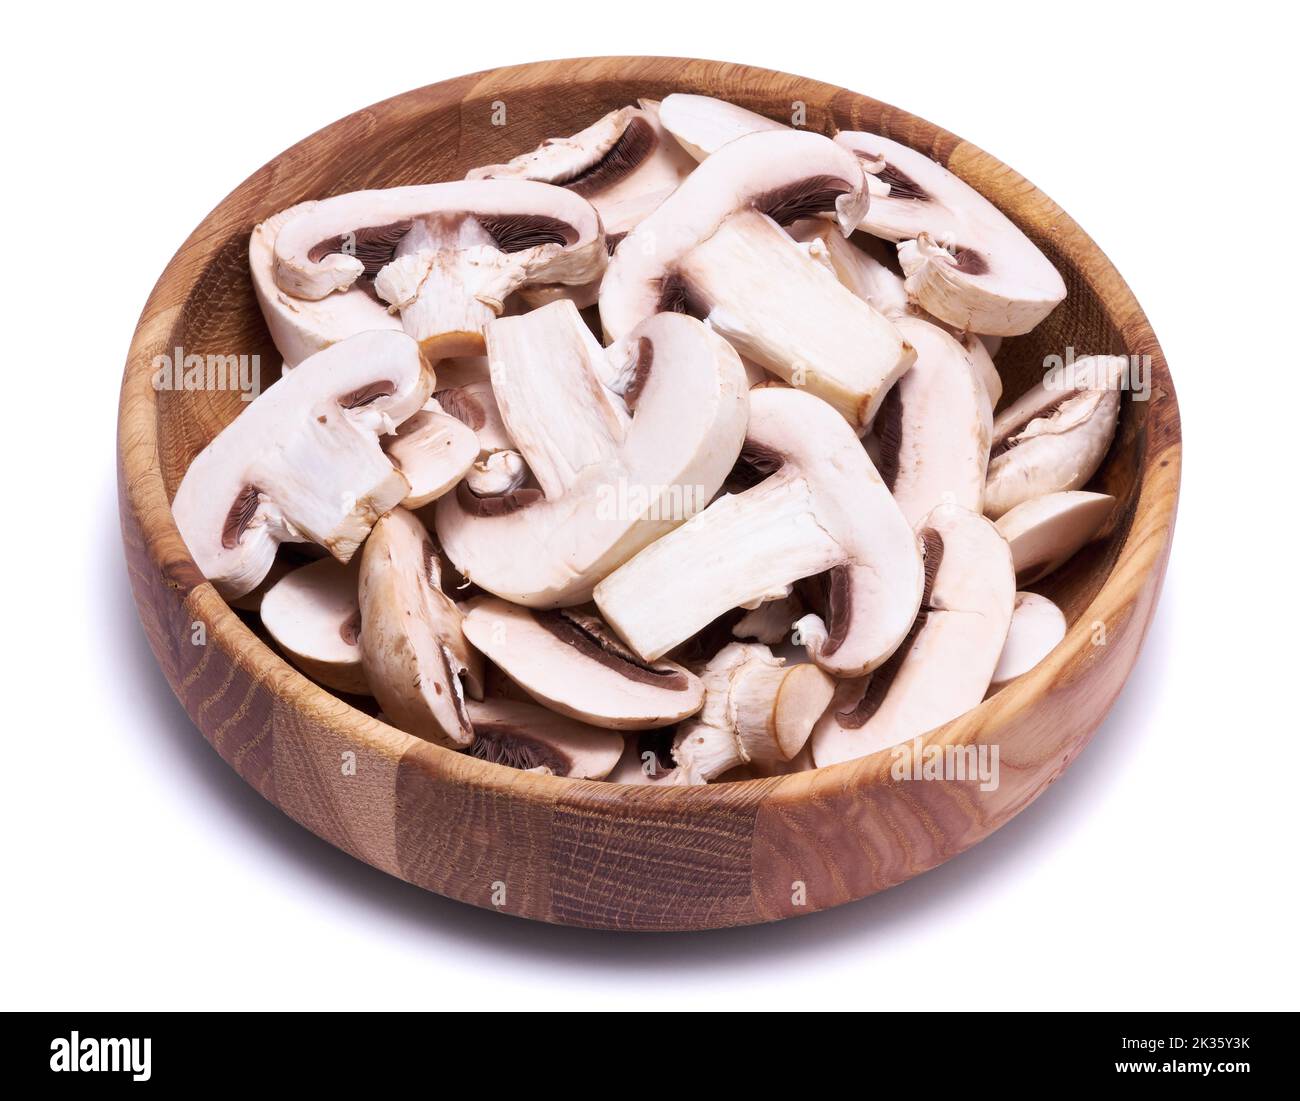 Sliced white champignon mushrooms in wooden bowl isolated on white background Stock Photo